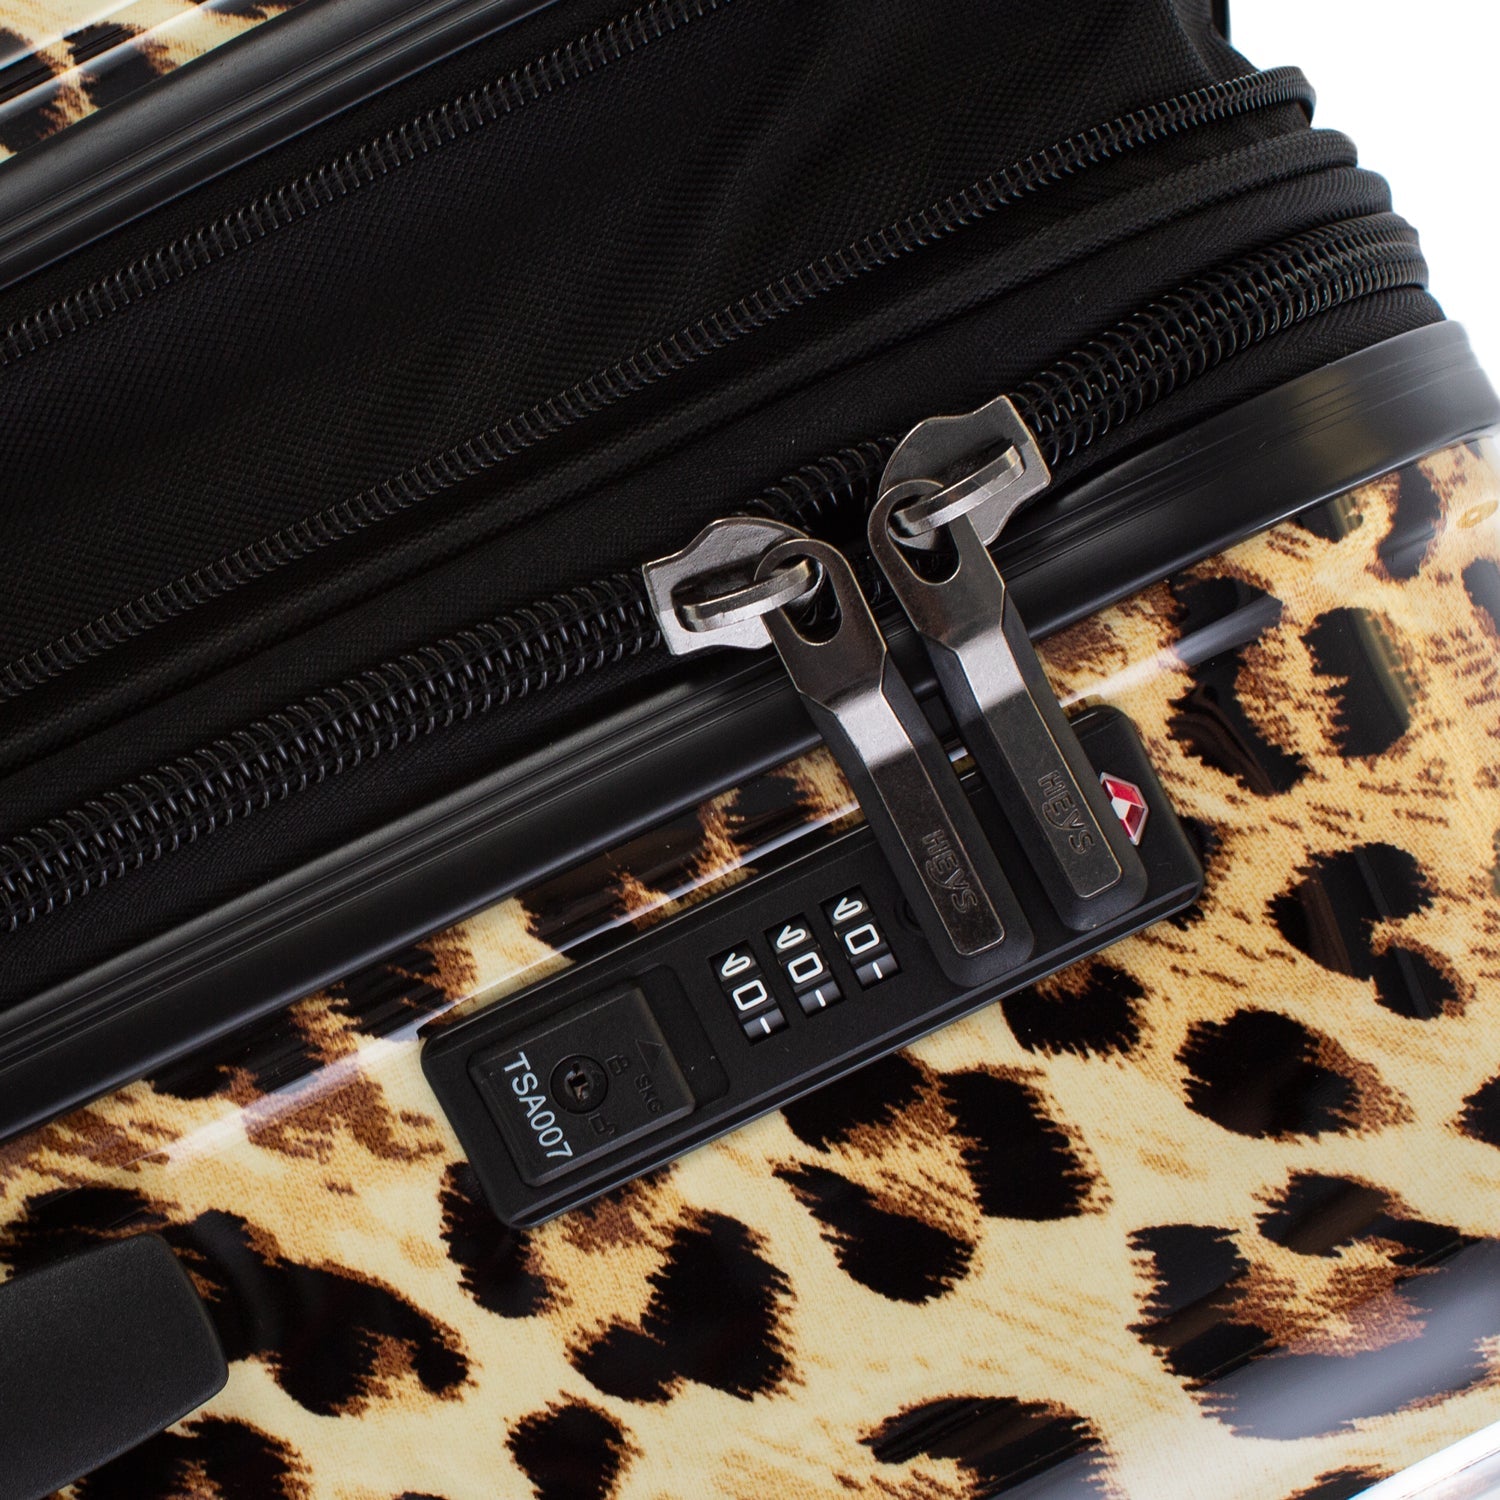 Brown Leopard Fashion Spinner® 30" Luggage